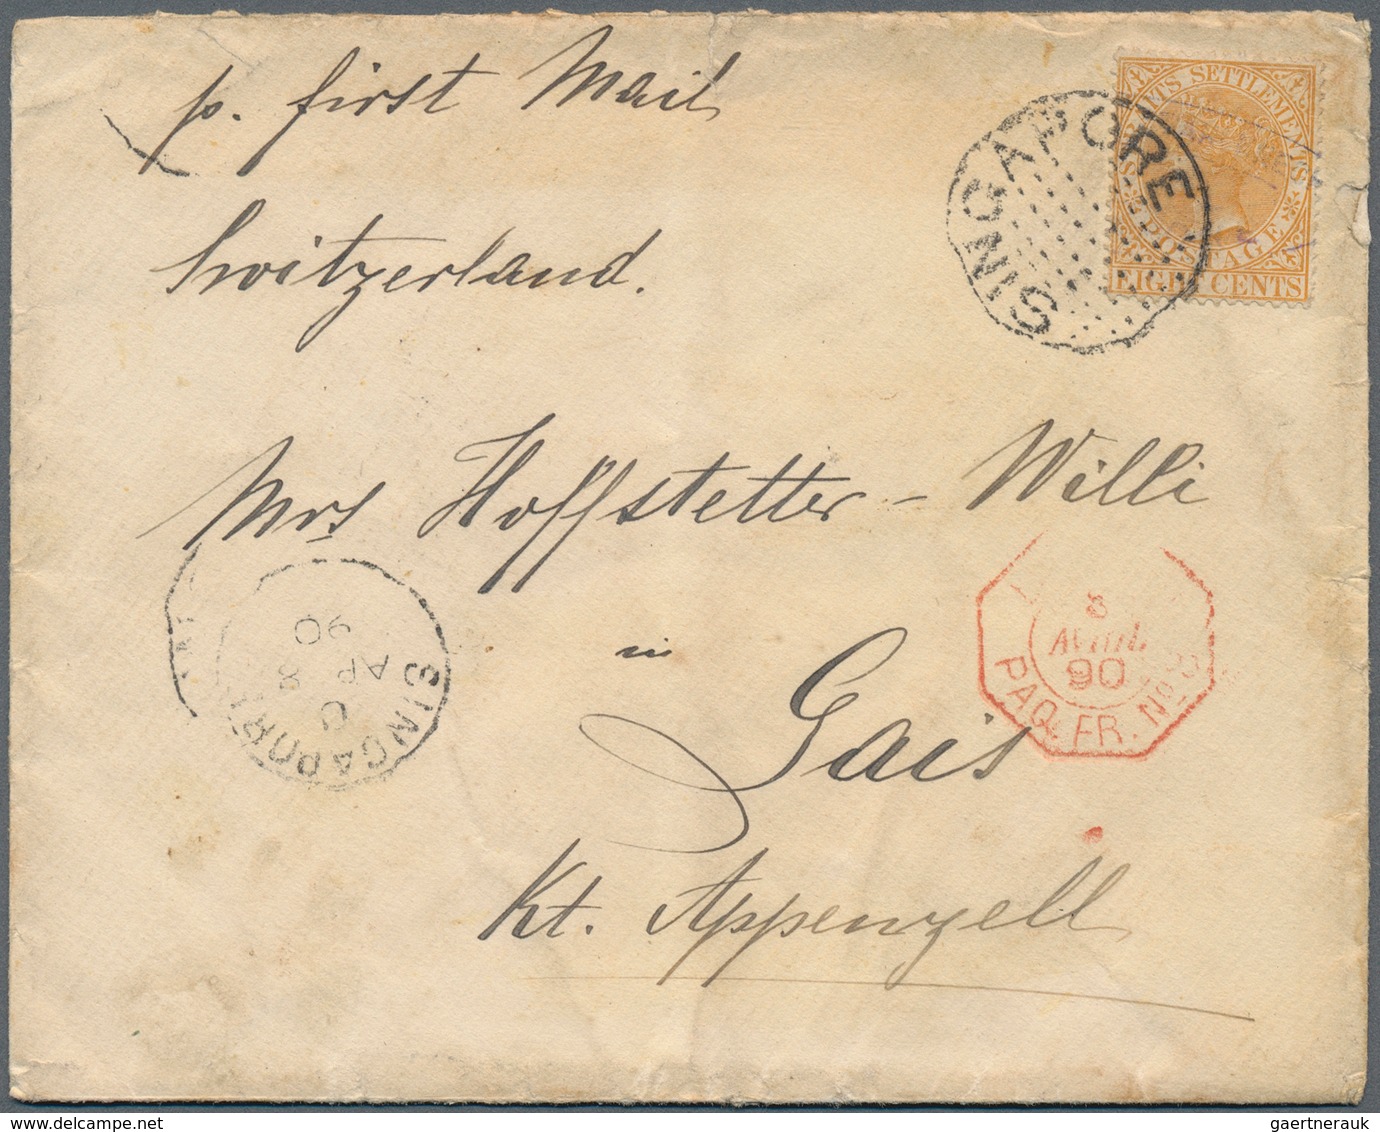 Malaiische Staaten - Straits Settlements: 1890, 8 C Orange QV With Company Cancel, Tied By Dotted Si - Straits Settlements